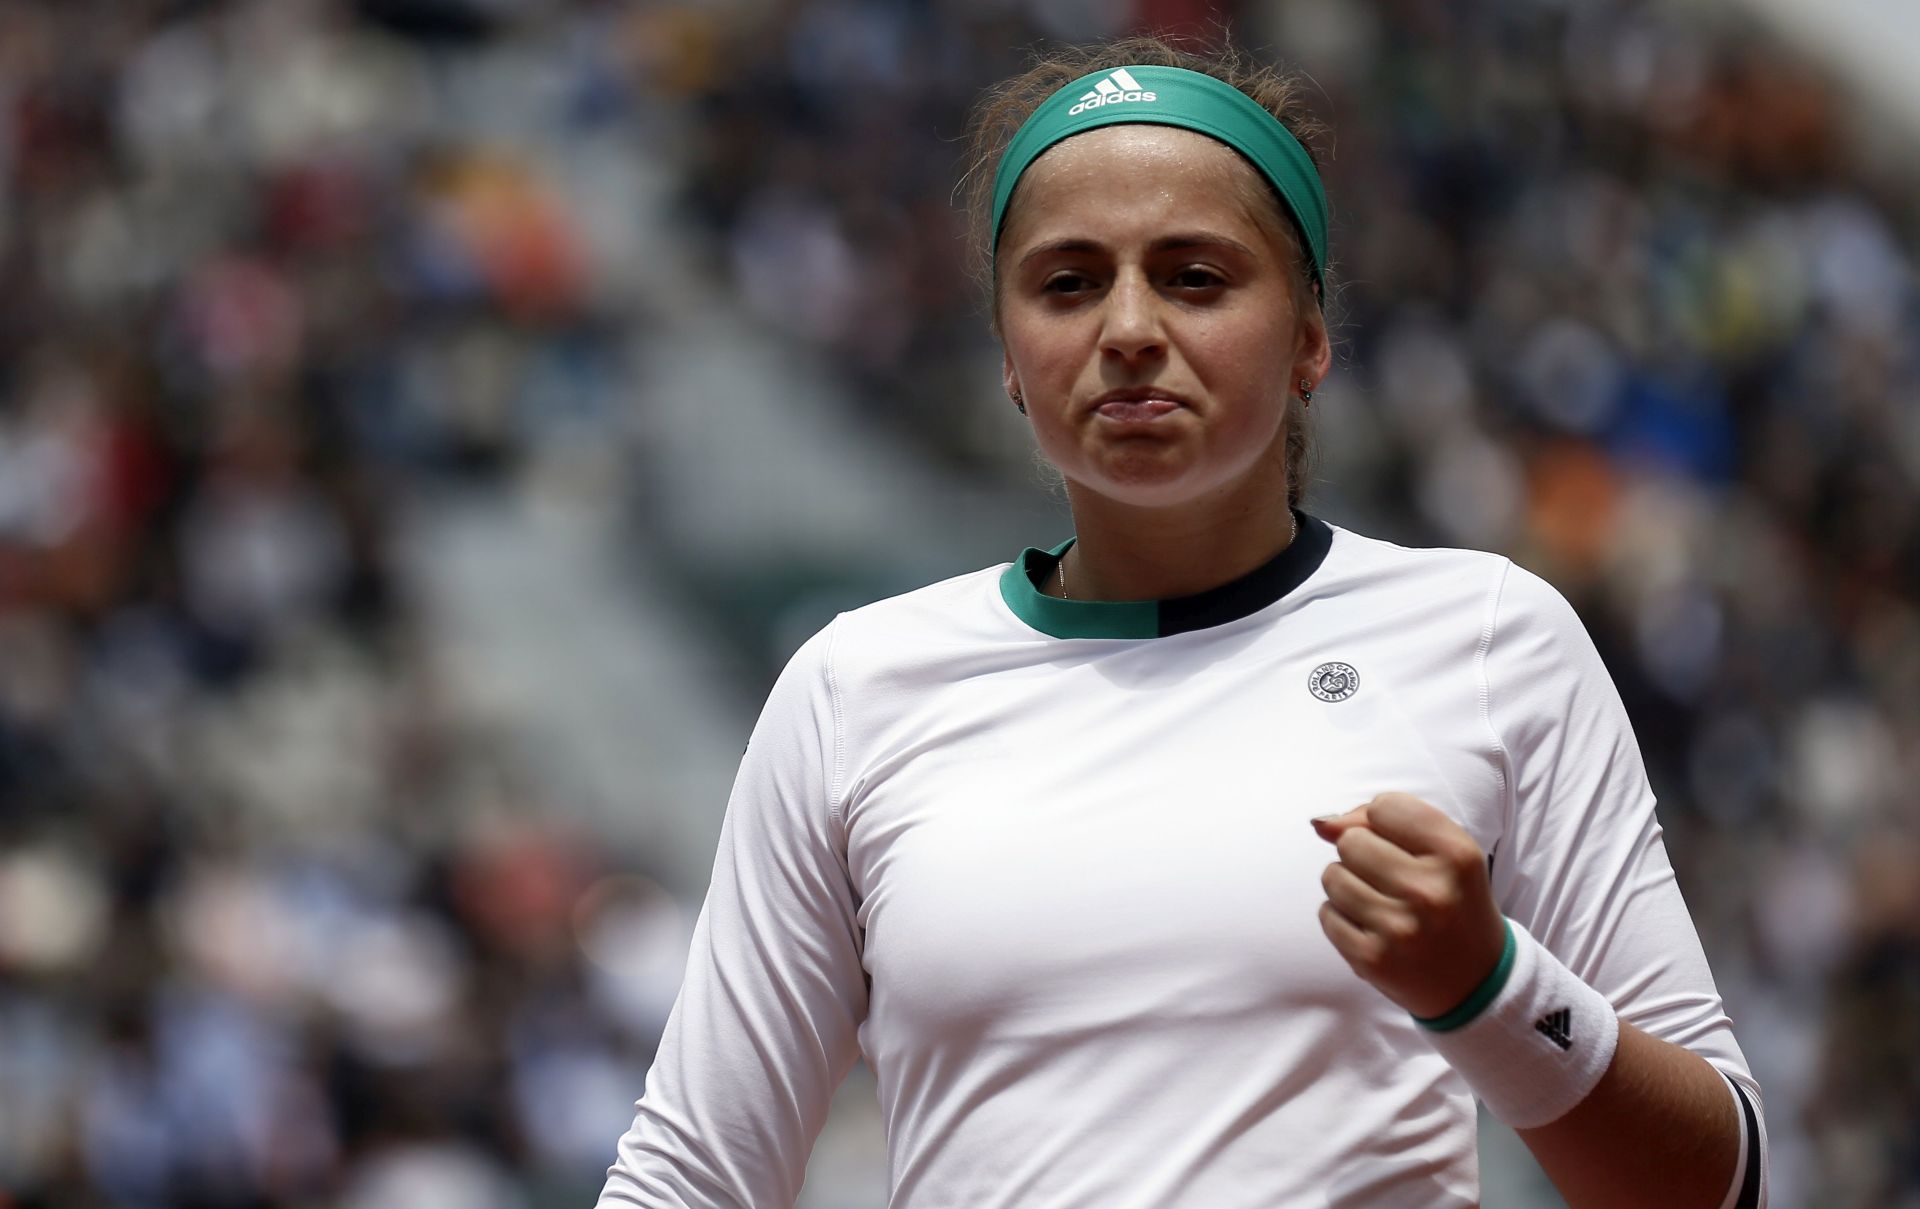 epa06013519 Jelena Ostapenko of Latvia reacts as she plays against Caroline Wozniacki of Denmark during their women’s singles quarter final match during the French Open tennis tournament at Roland Garros in Paris, France, 06 June 2017.  EPA/ETIENNE LAURENT